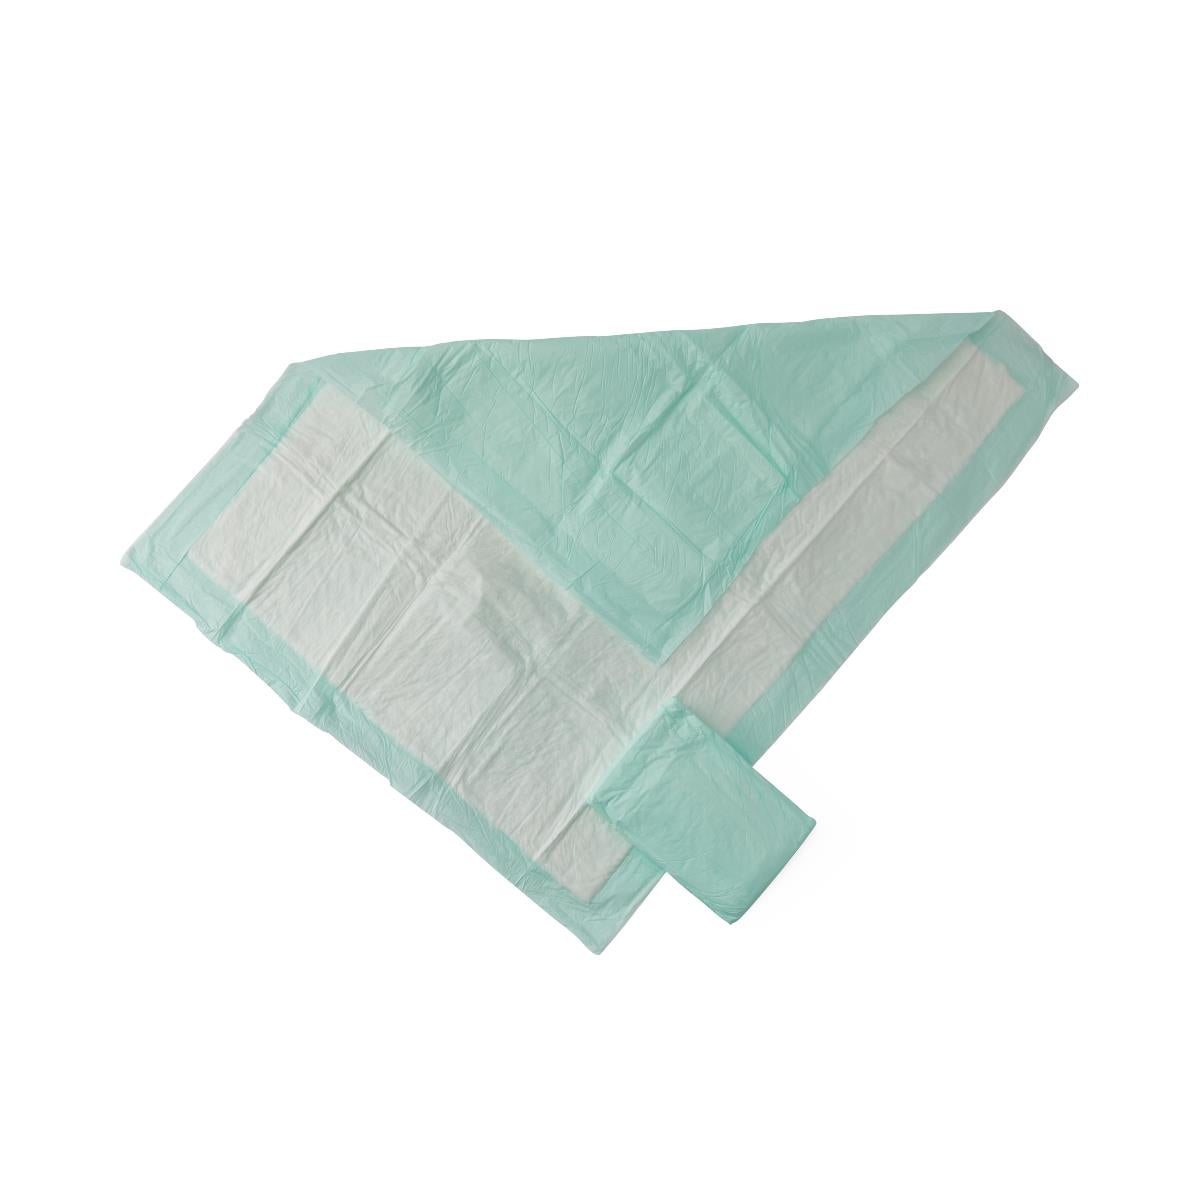 80 Each-Case / Green / 30" X 36" Incontinence - MEDLINE - Wasatch Medical Supply